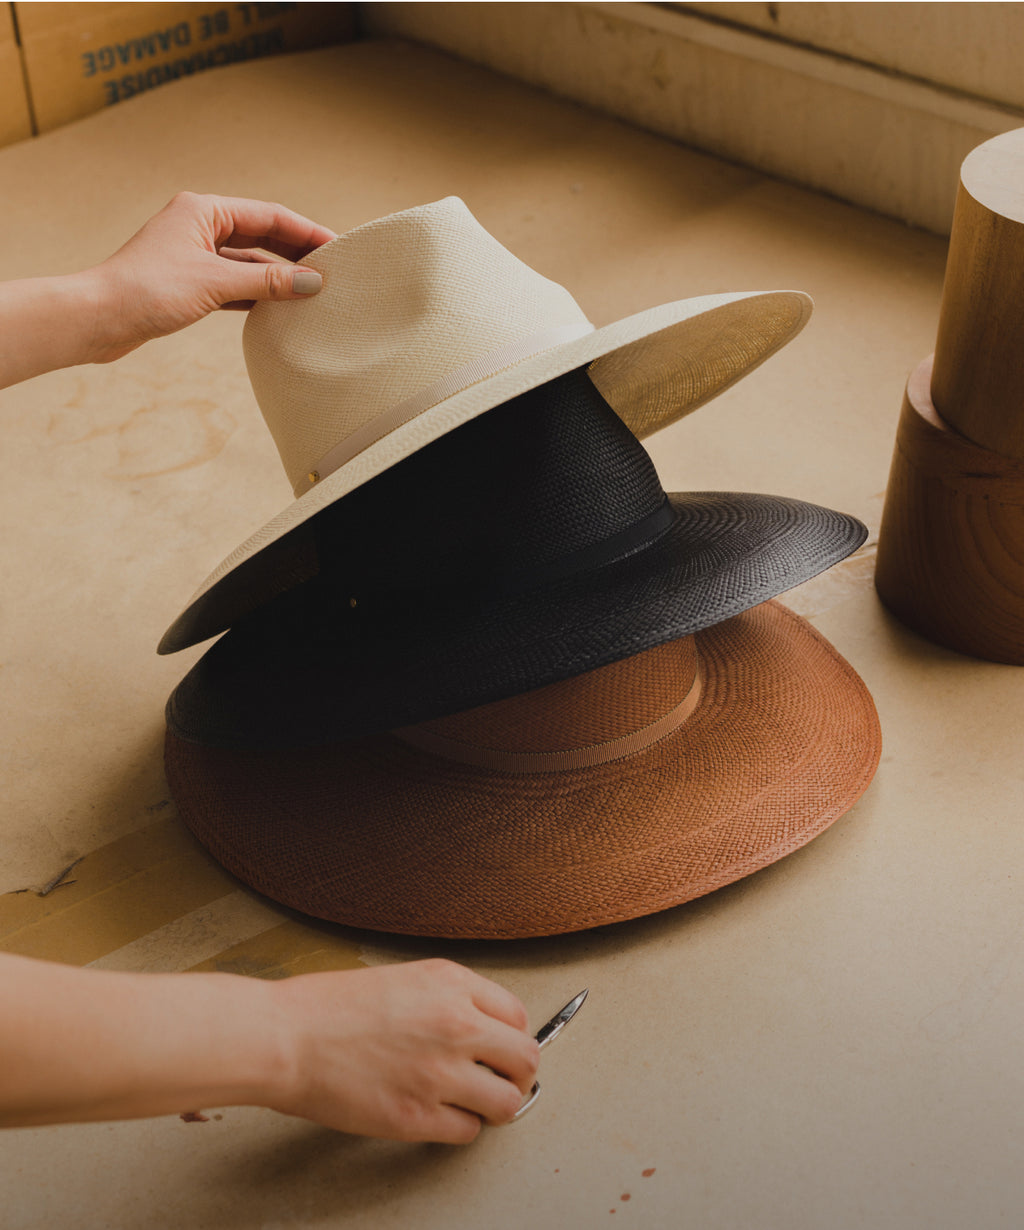 Three wide-brimmed hats stacked on a table with a hand adjusting the top hat.